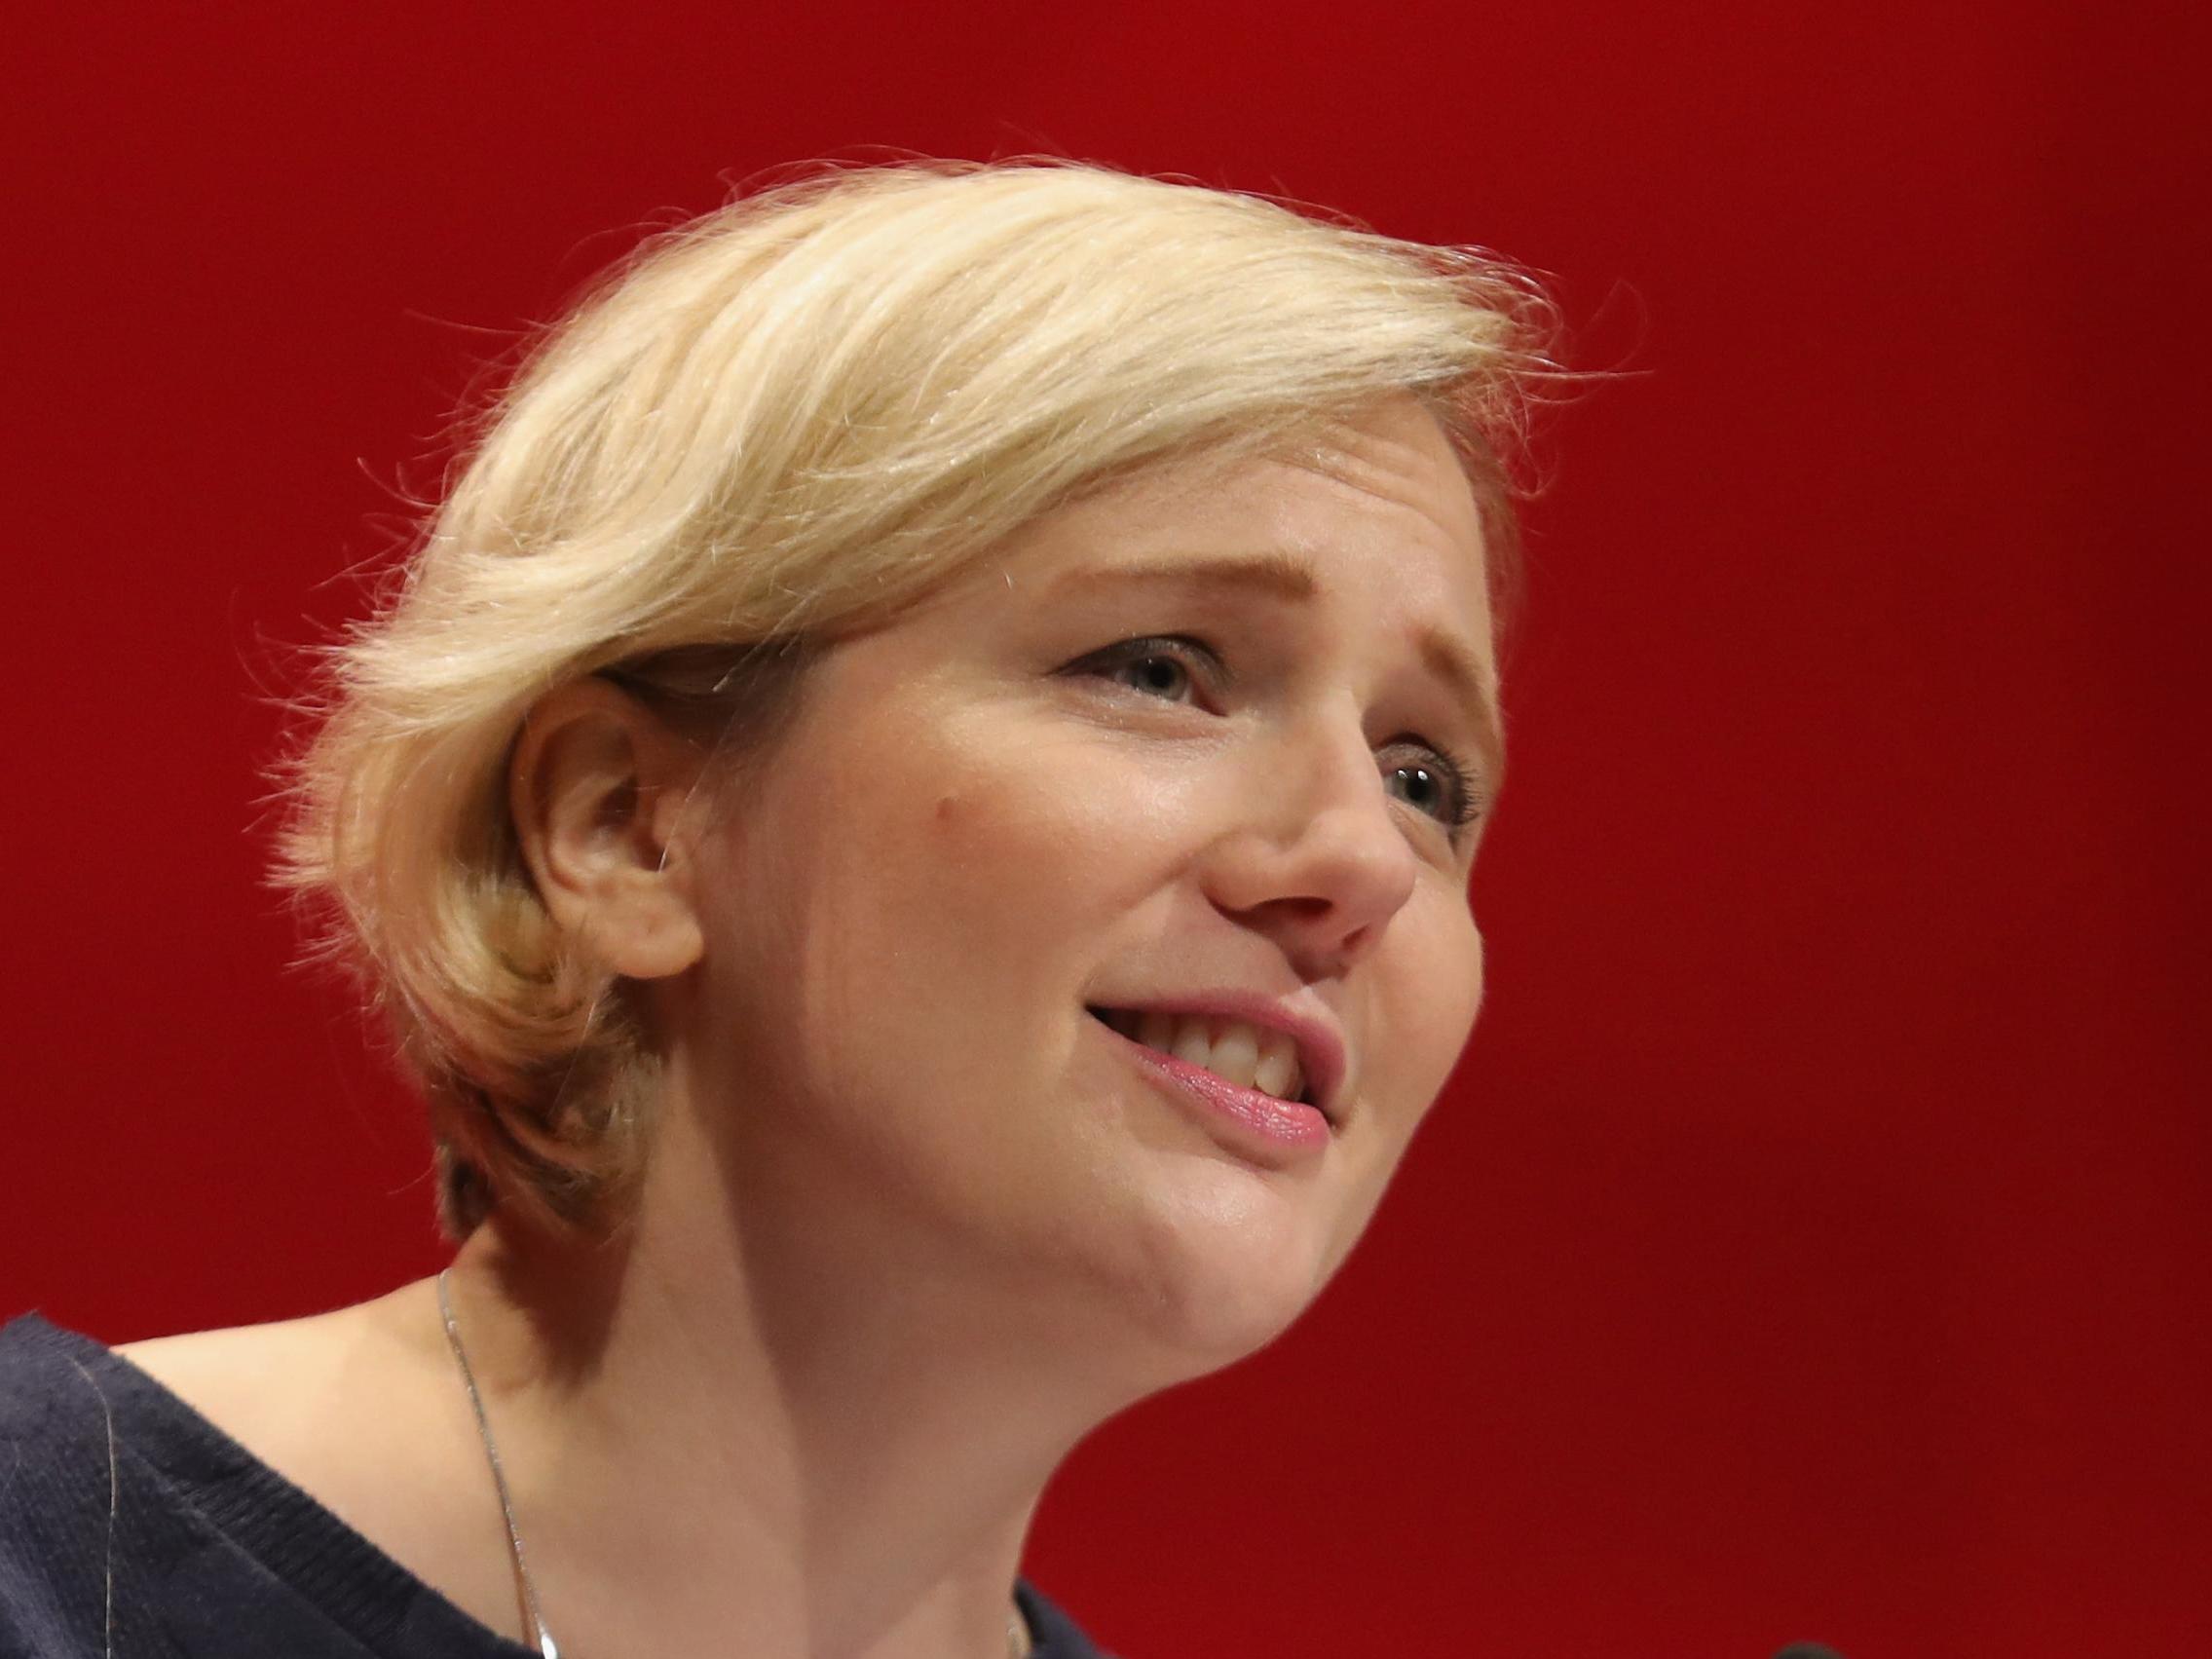 Stella Creasy warned employers that trying to silence women raising concerns about pay inequalities ‘isn’t the right response’